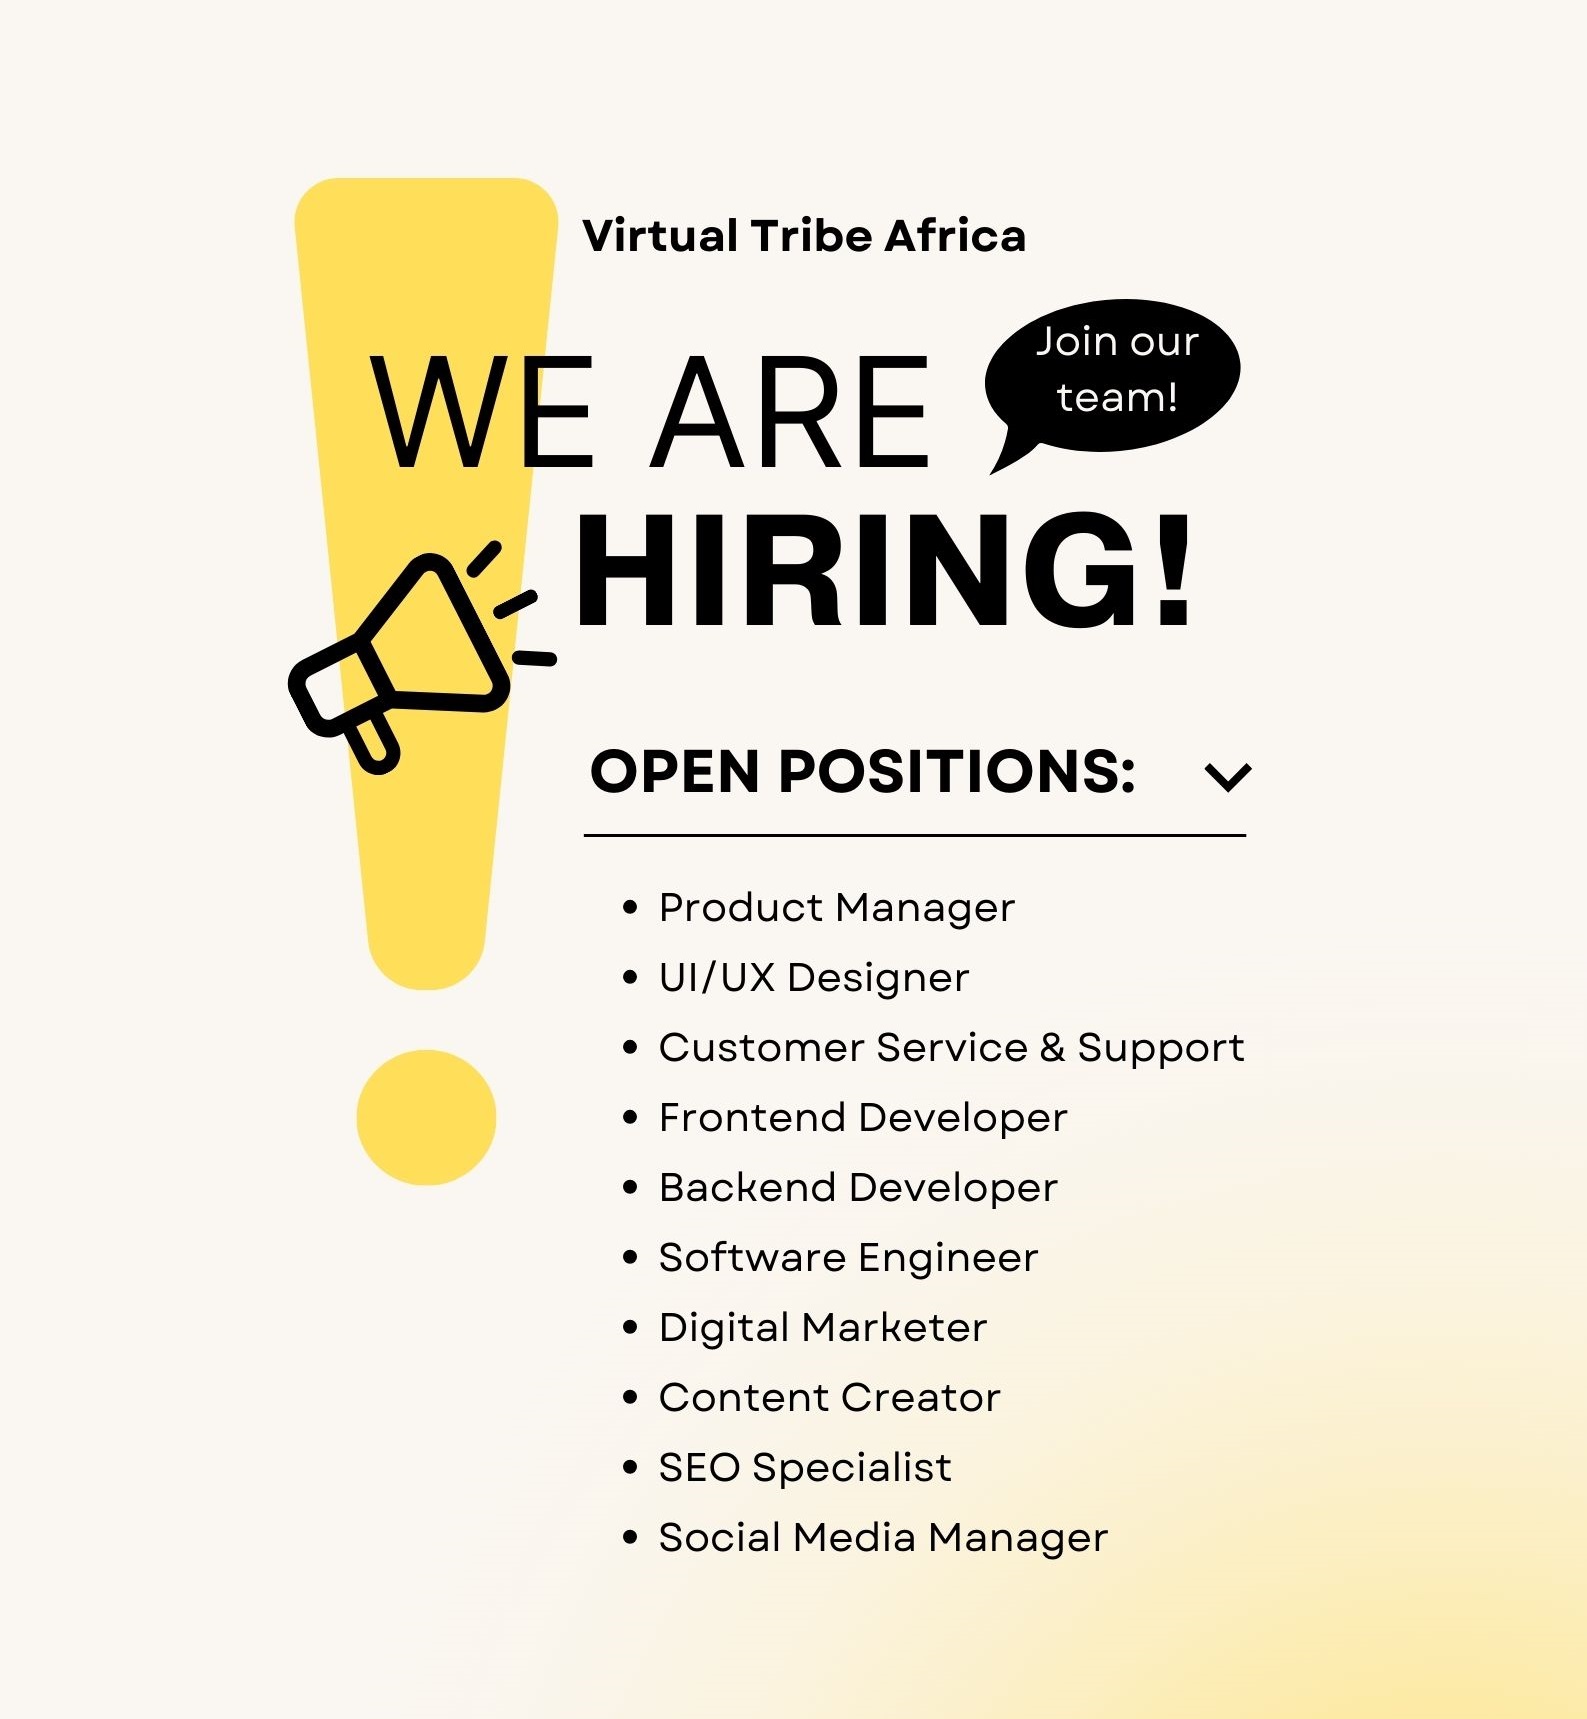 Backend Developers Needed at Virtual Tribe Africa